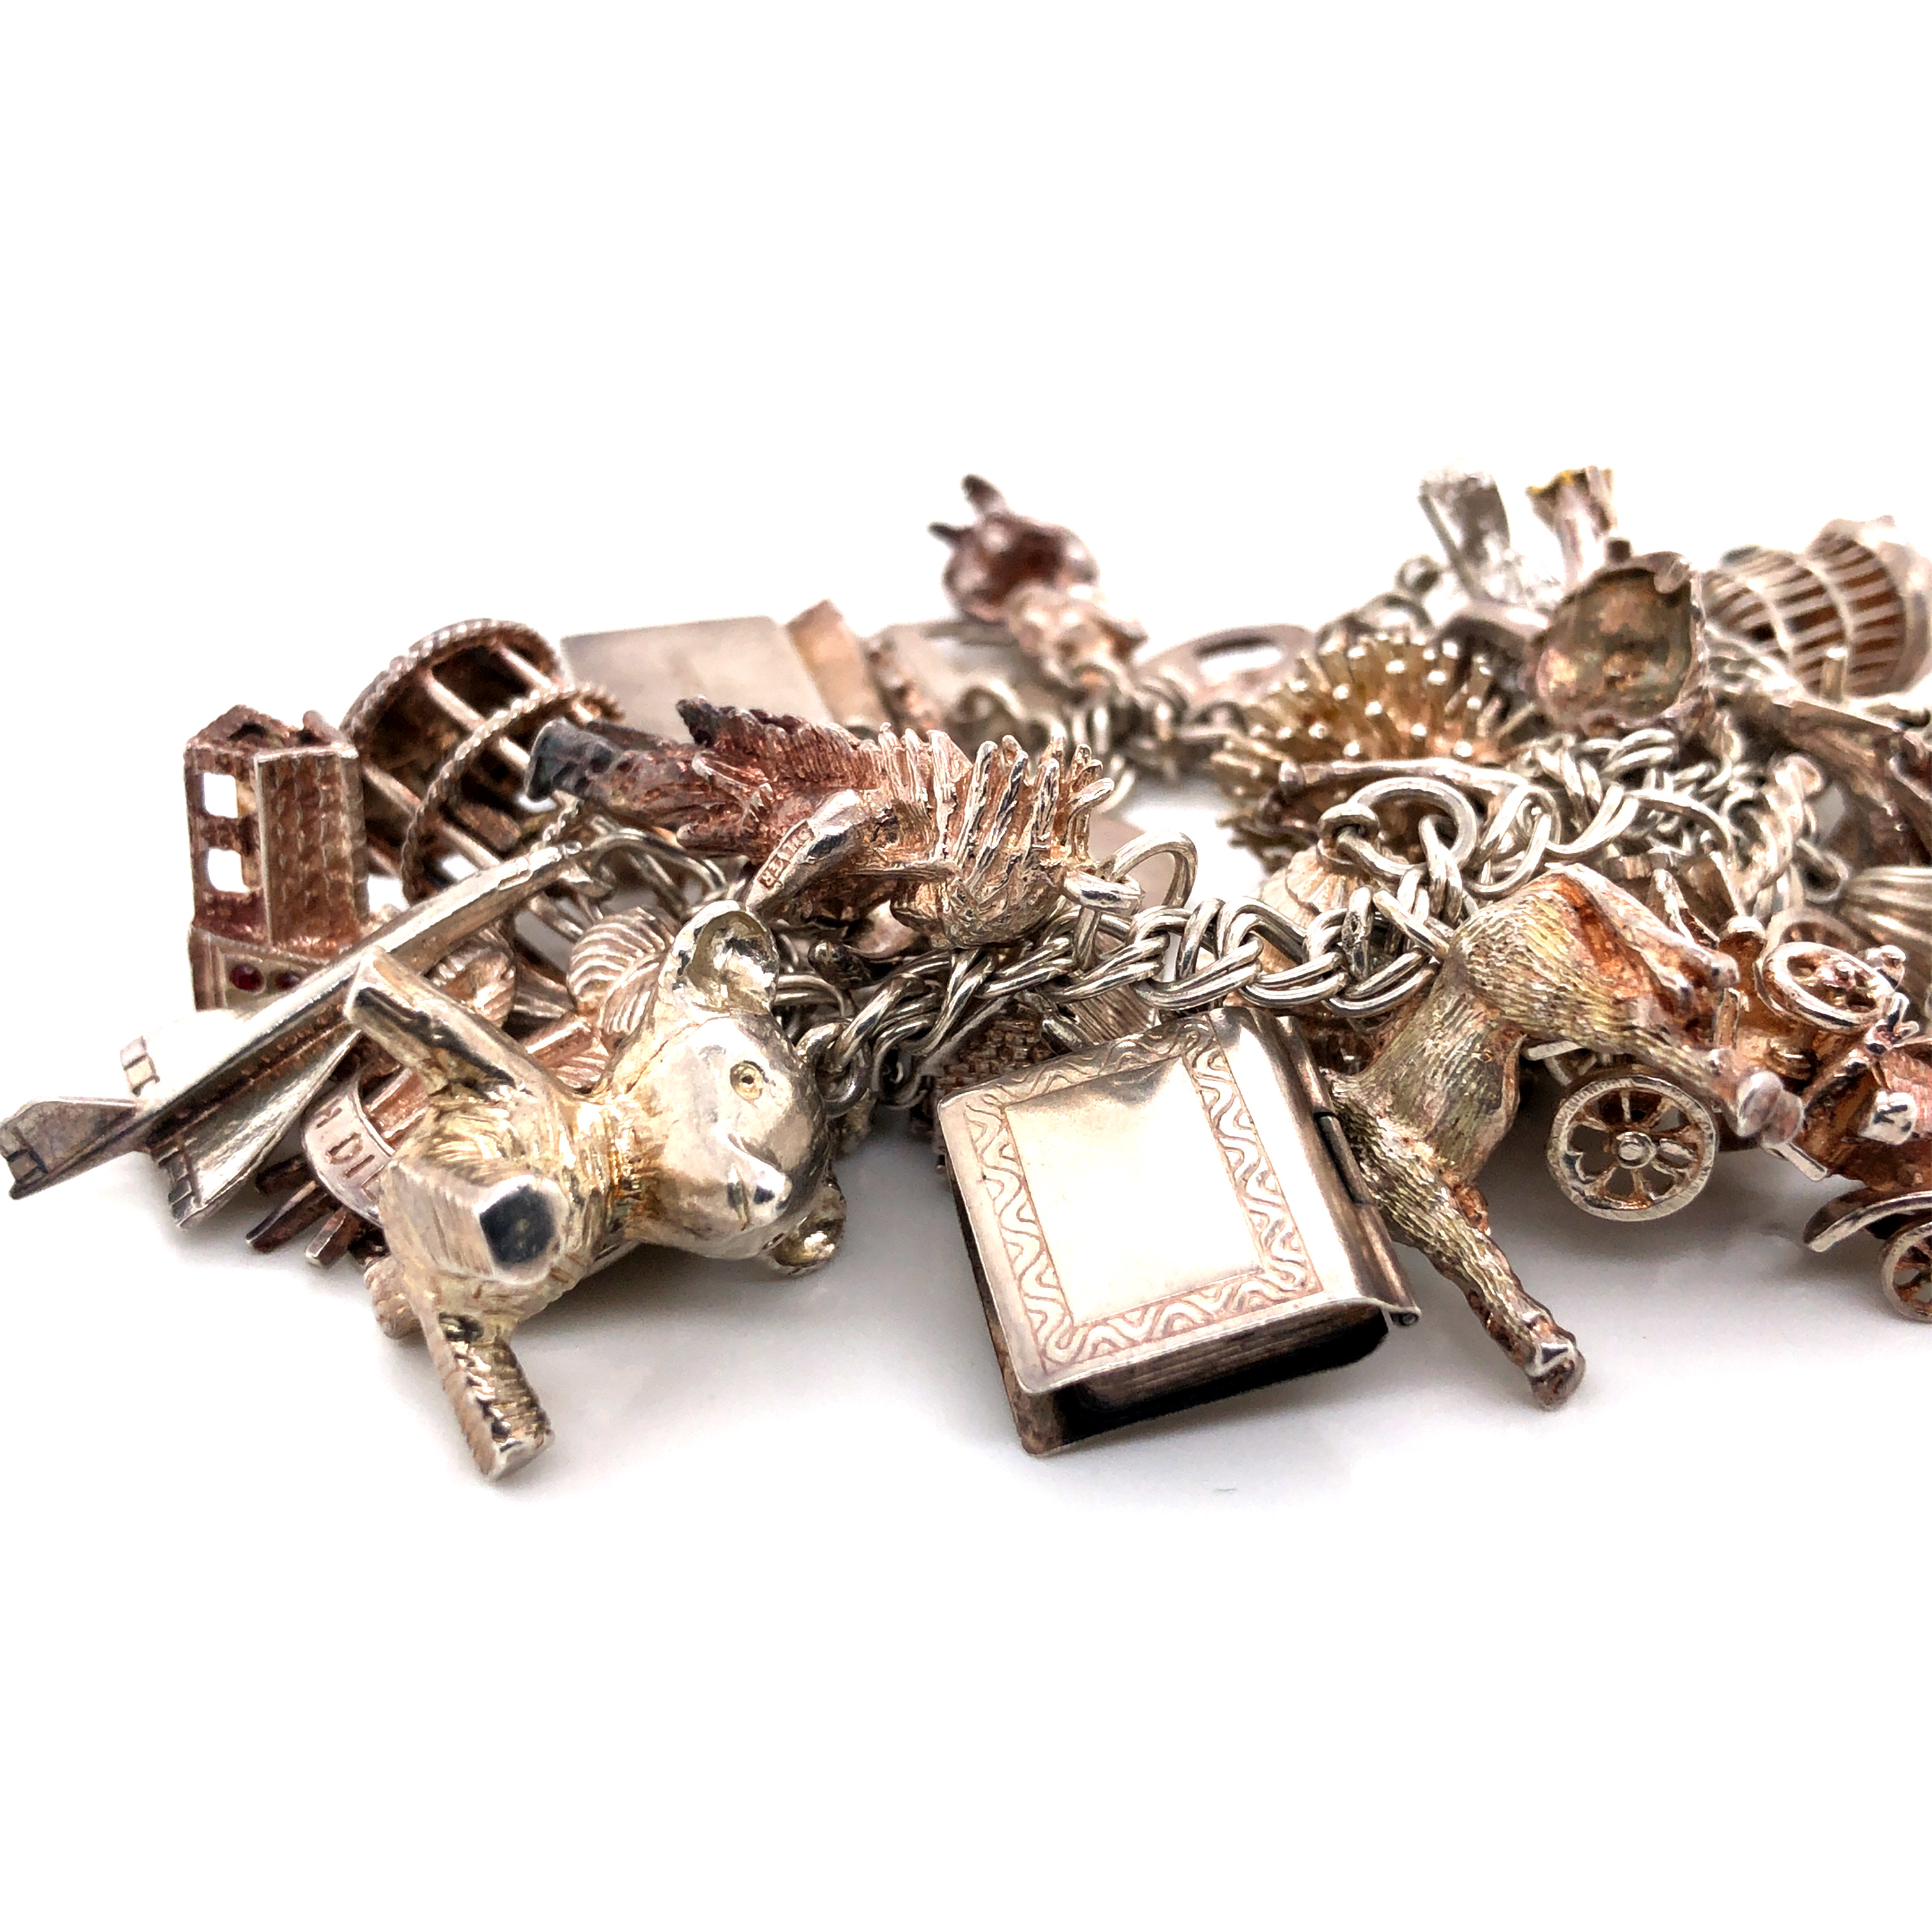 A SILVER CHARM BRACELET WITH VARIOUS SILVER AND WHITE METAL CHARMS TO INCLUDE A 10 SHILLING NOTE - Image 4 of 5